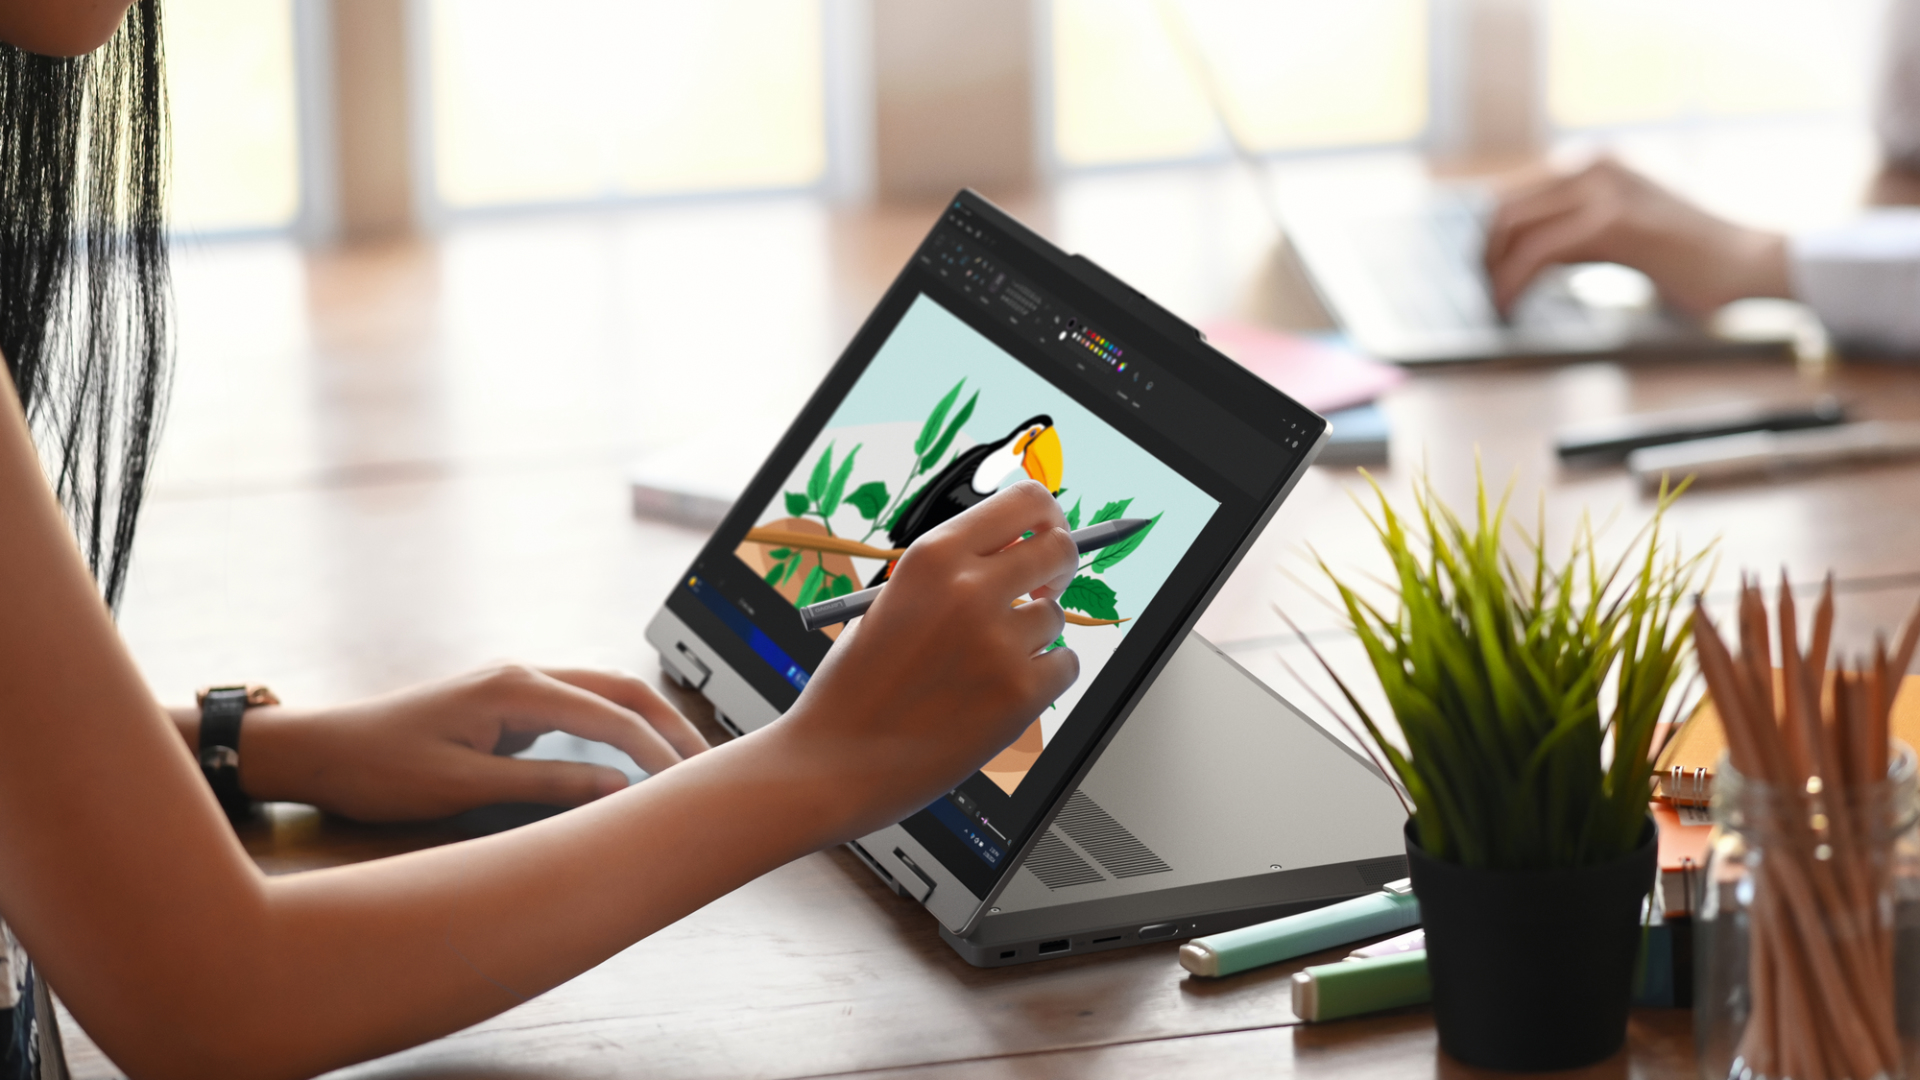 Lenovo Updates Dual-Display Yoga Book and Introduces New Detachable  ThinkBook Hybrid - CNET